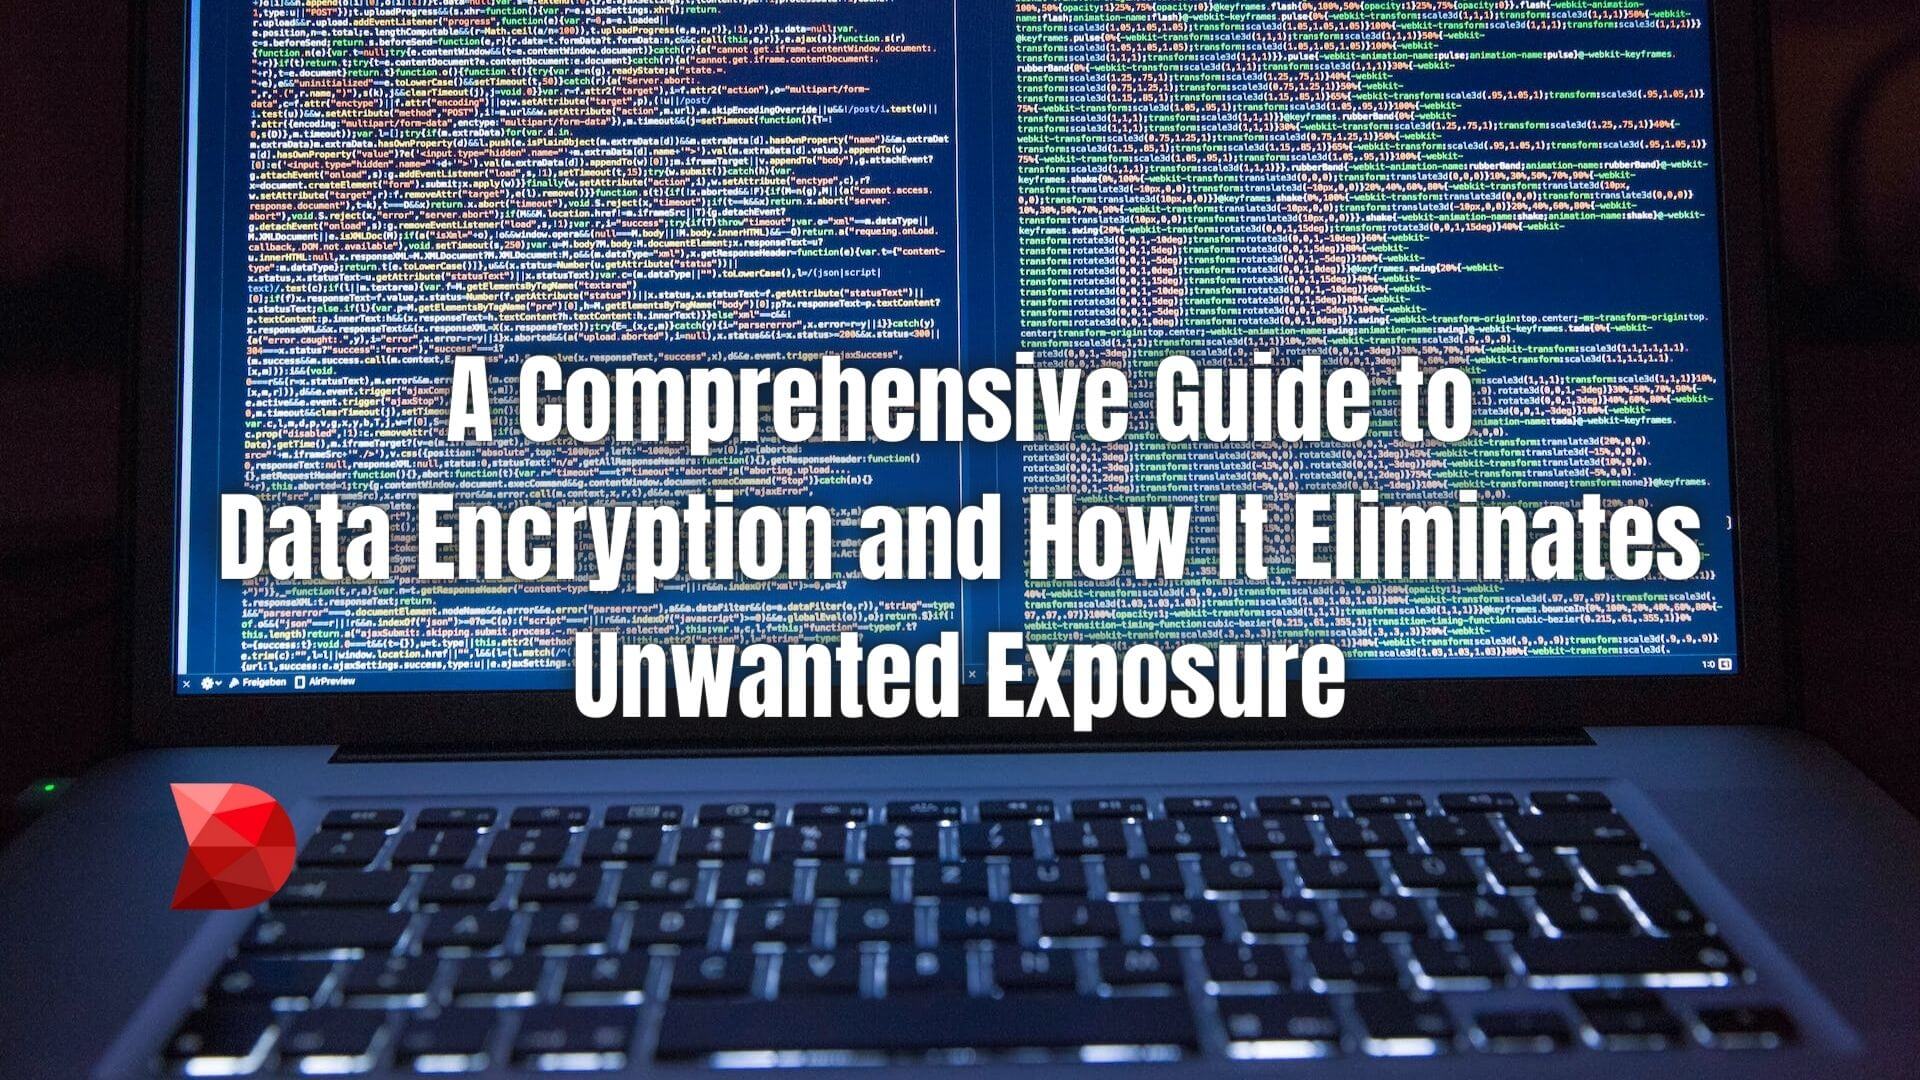 Unlock the world of data encryption with this comprehensive guide. Click here to learn key techniques and tools for secure data handling.